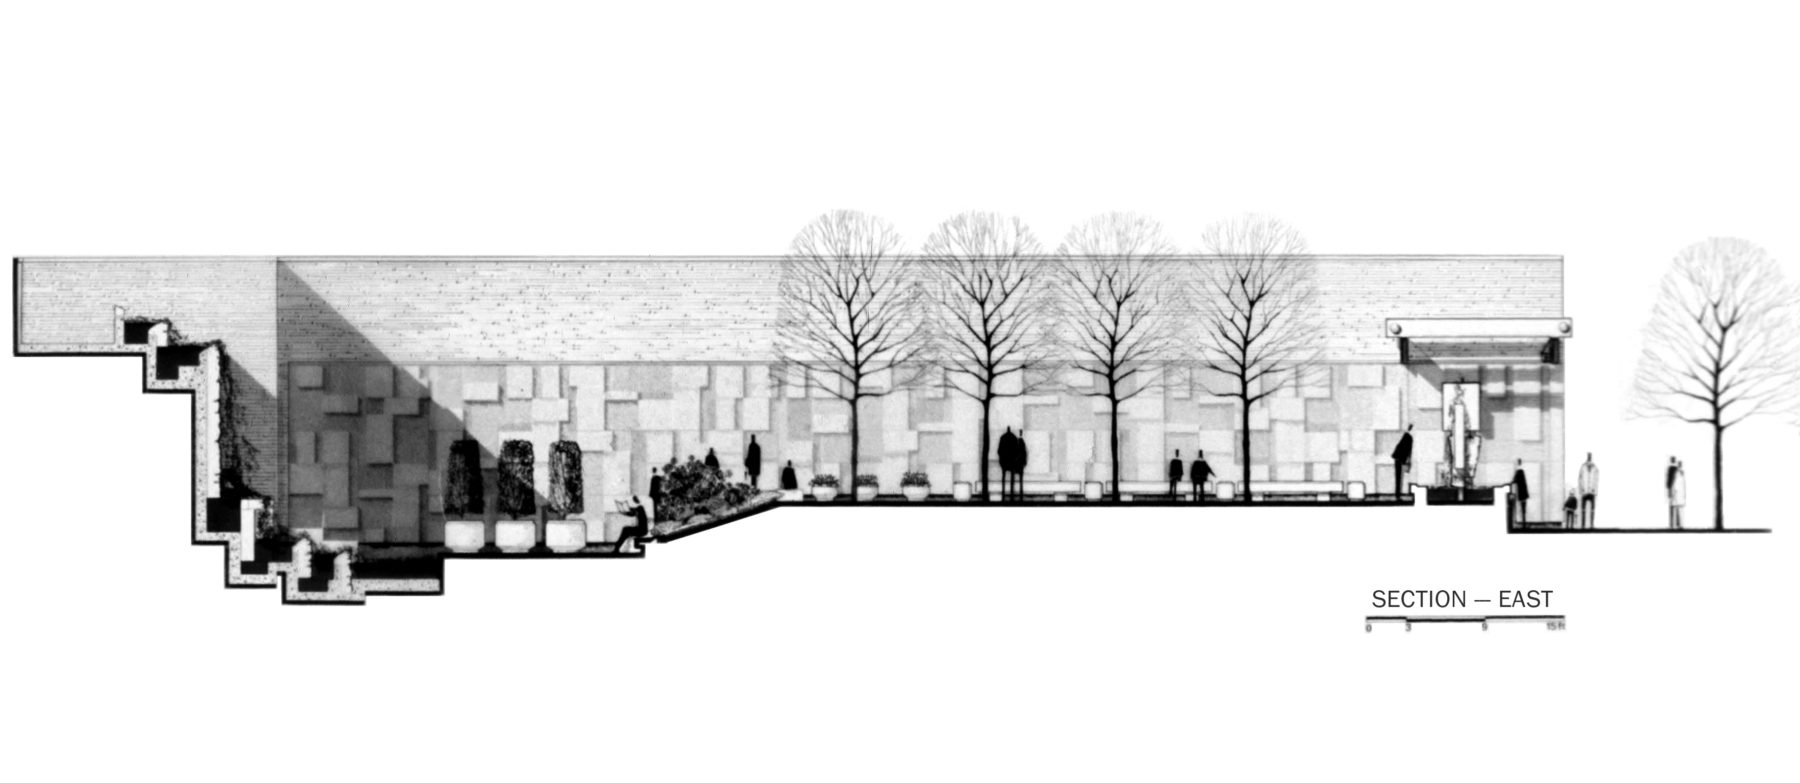 Section drawing of greenacre park